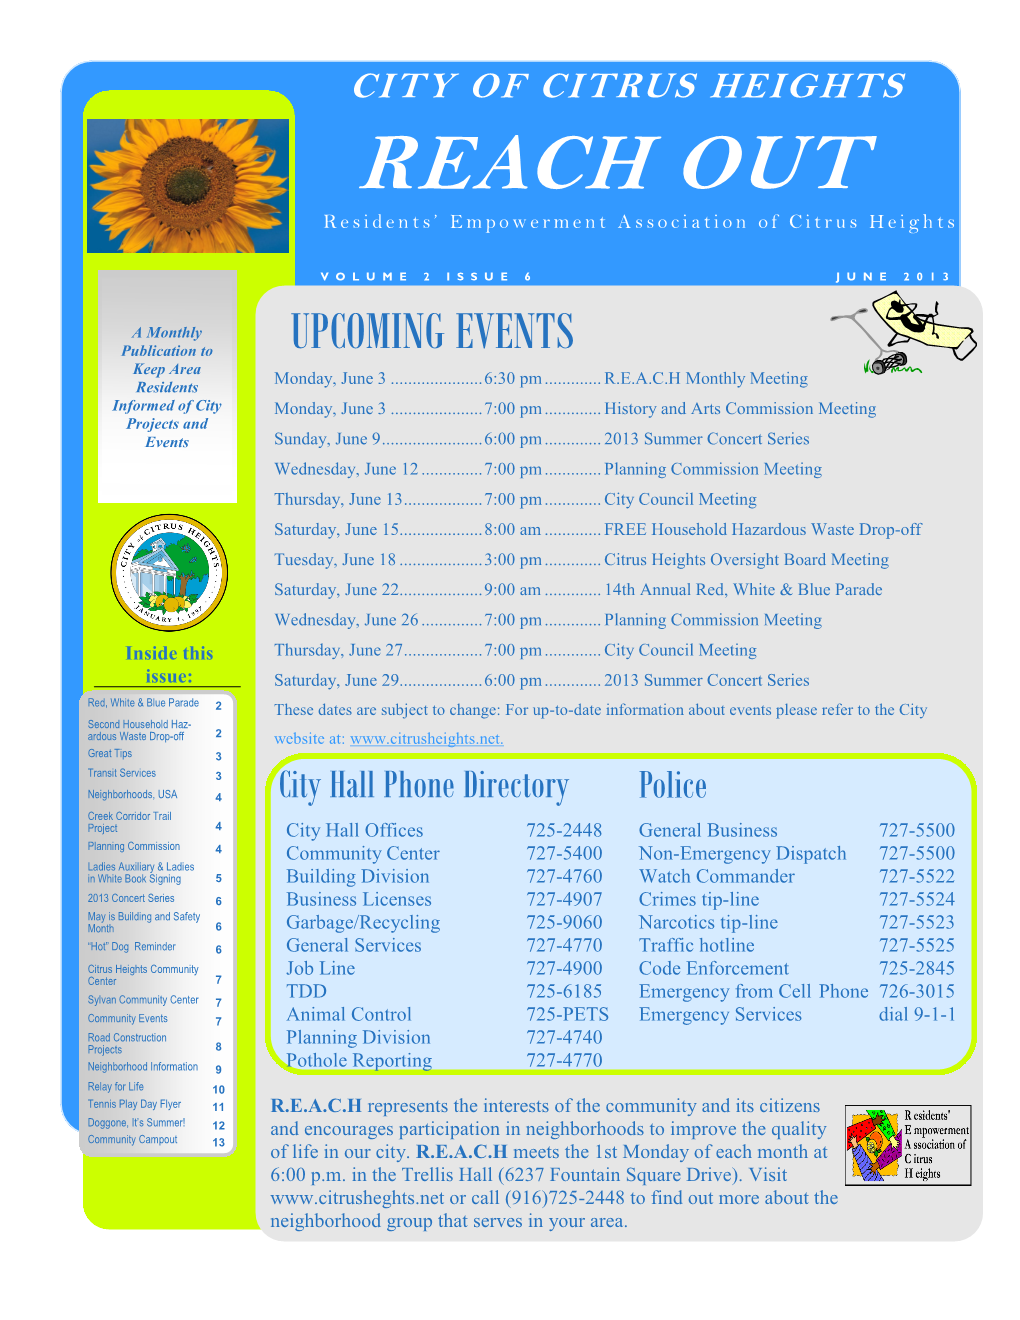 REACH out Residents’ Empowerment Association of Citrus Heights